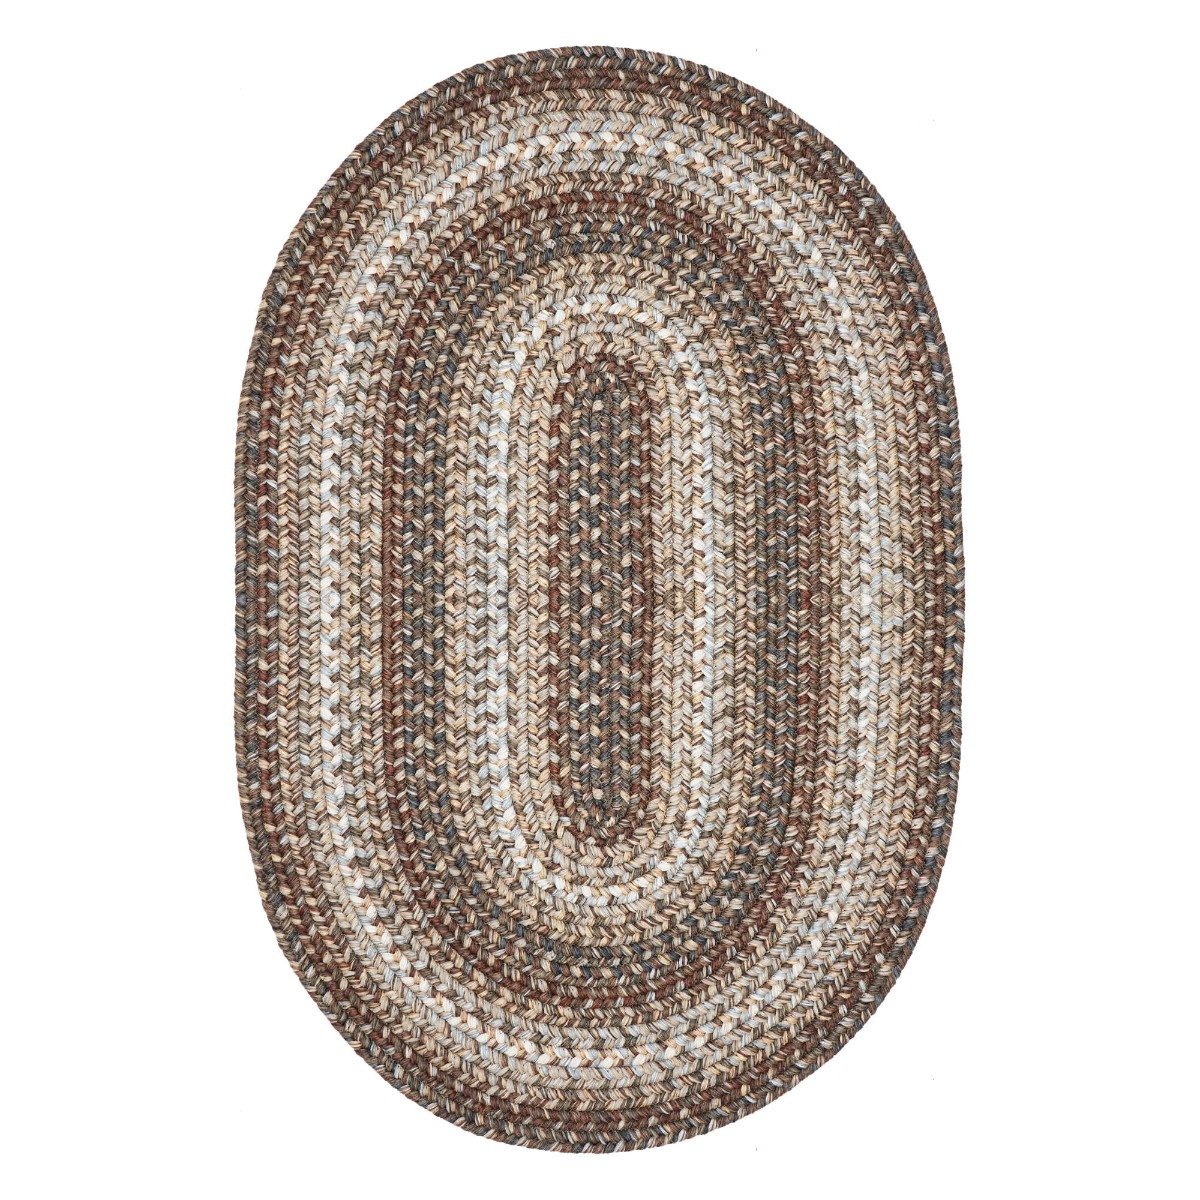 https://cdn.homespice.com/media/catalog/product/w/i/wildwood_brown_oval_washabl_pet-friendly_braided_rug-silo_3_1.jpg?width=1500&height=1500&store=retail&image-type=image